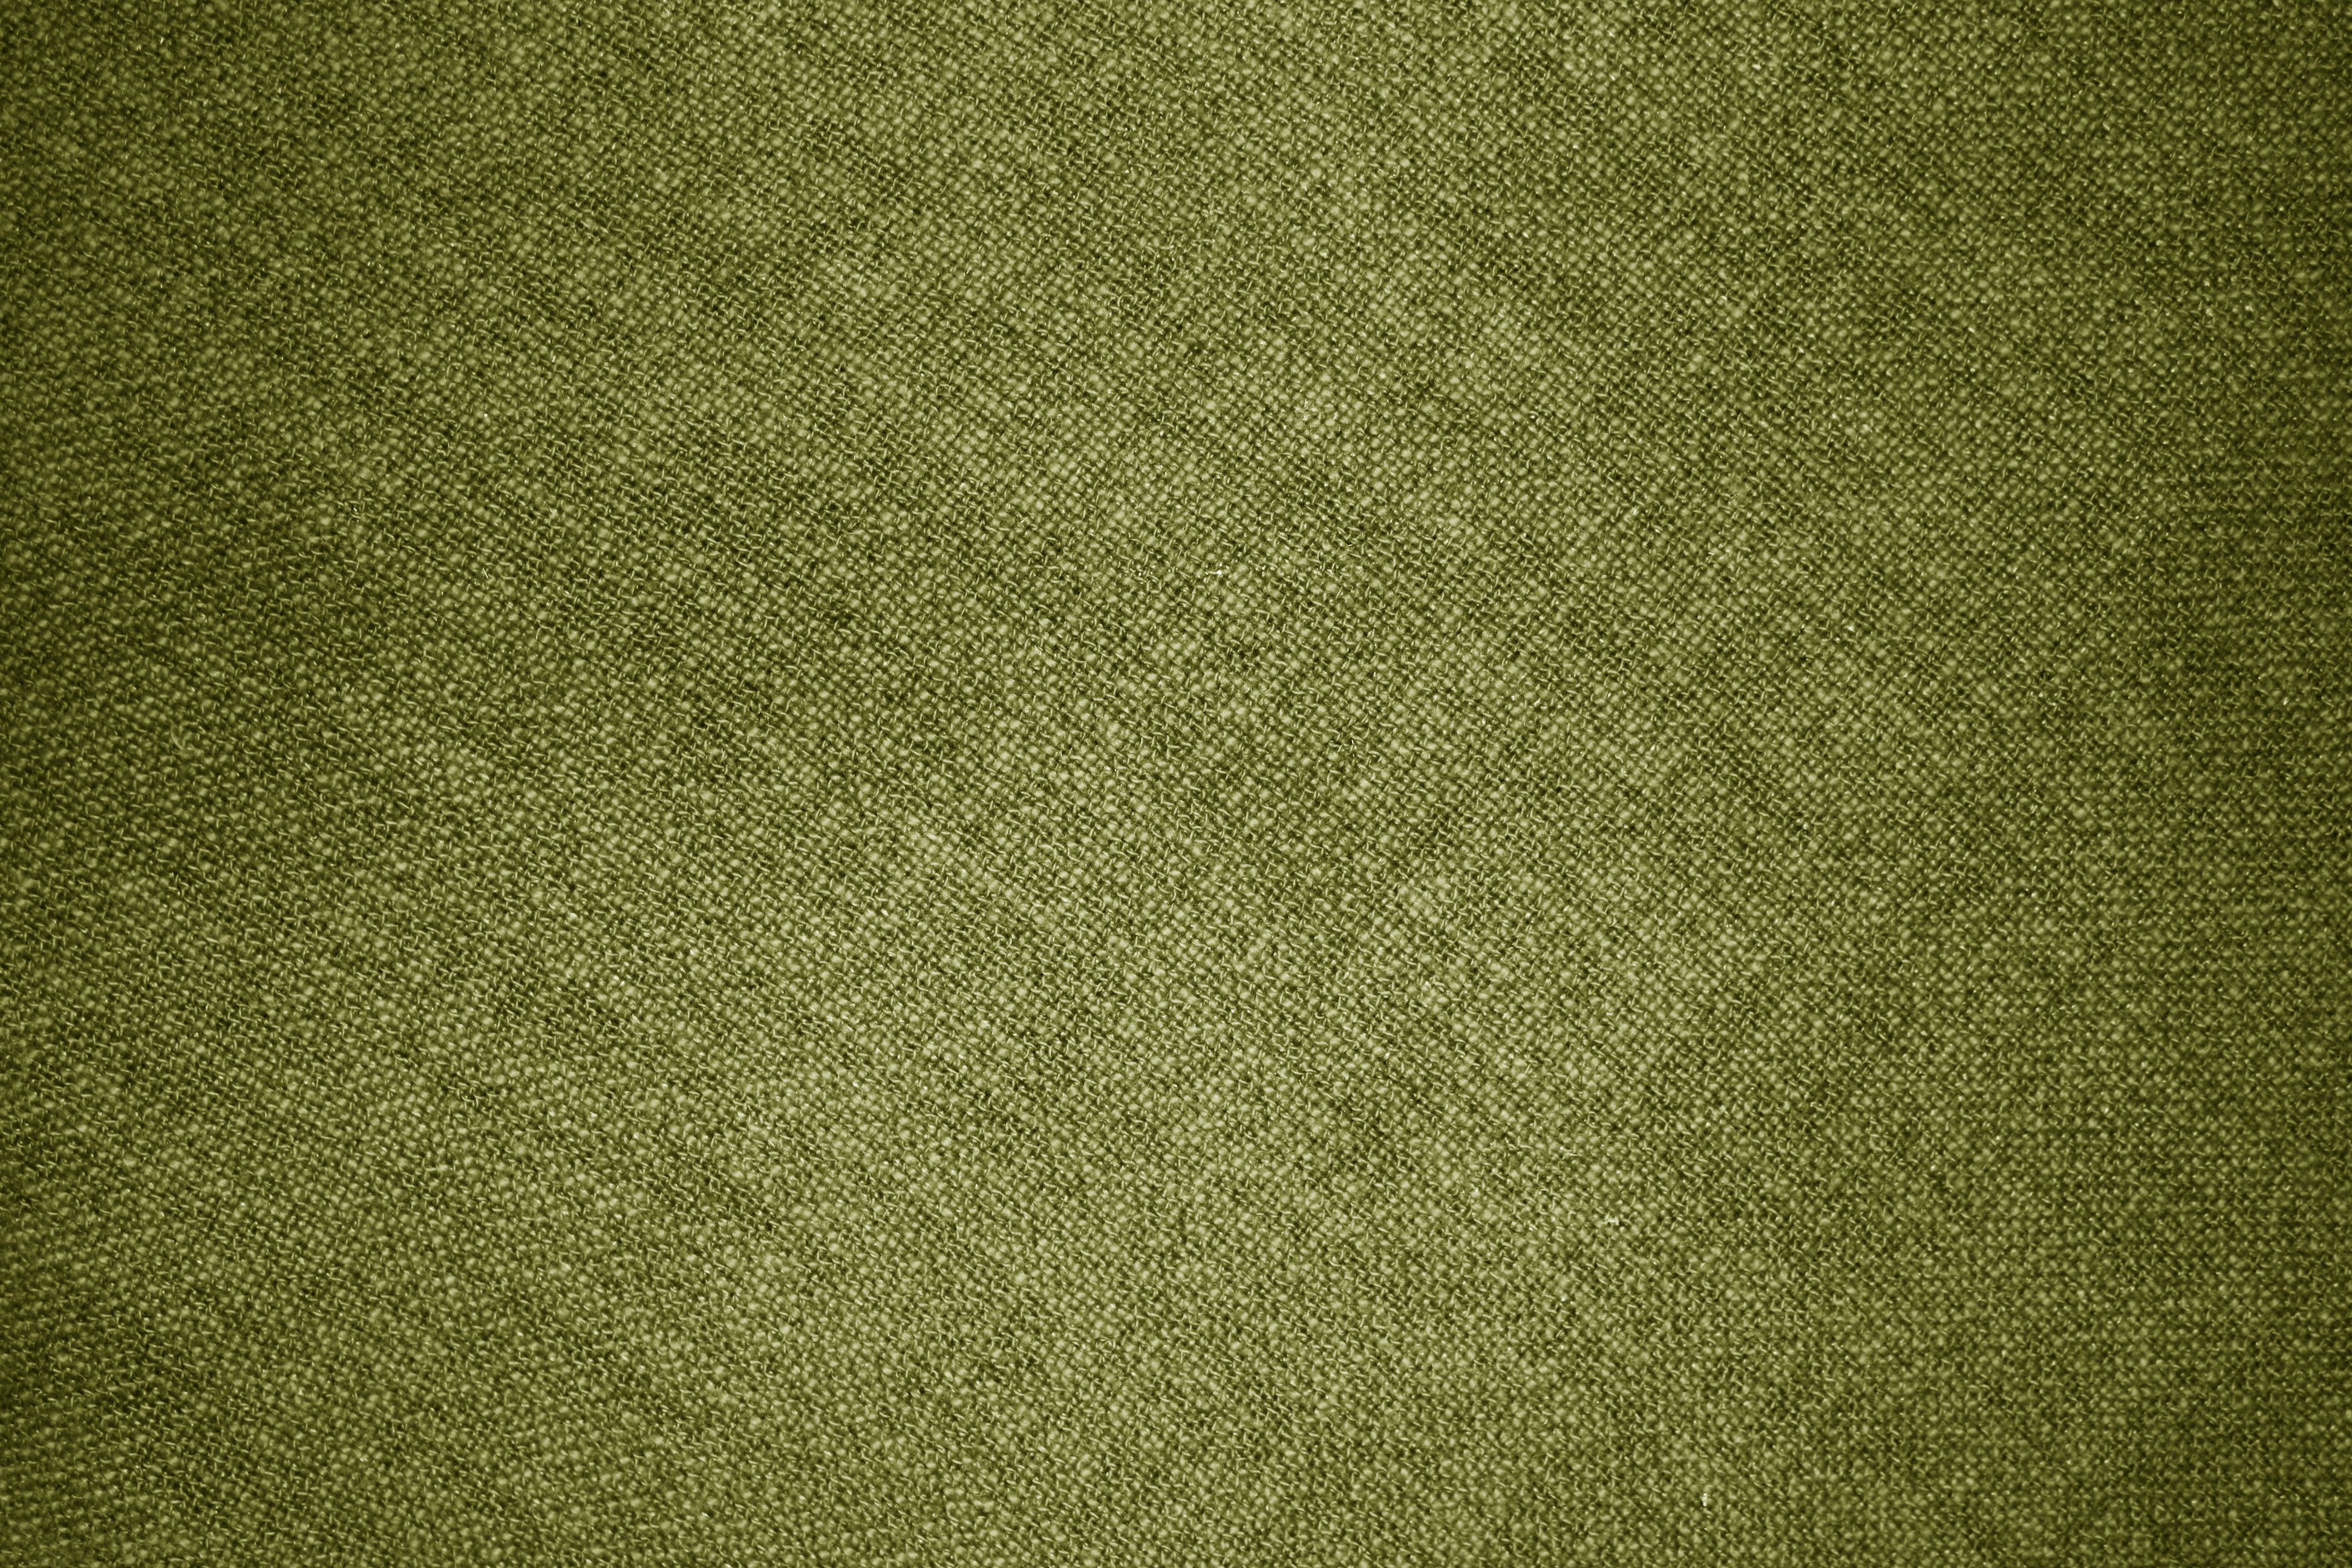 PHOTO TEXTURE. Olive green wallpaper